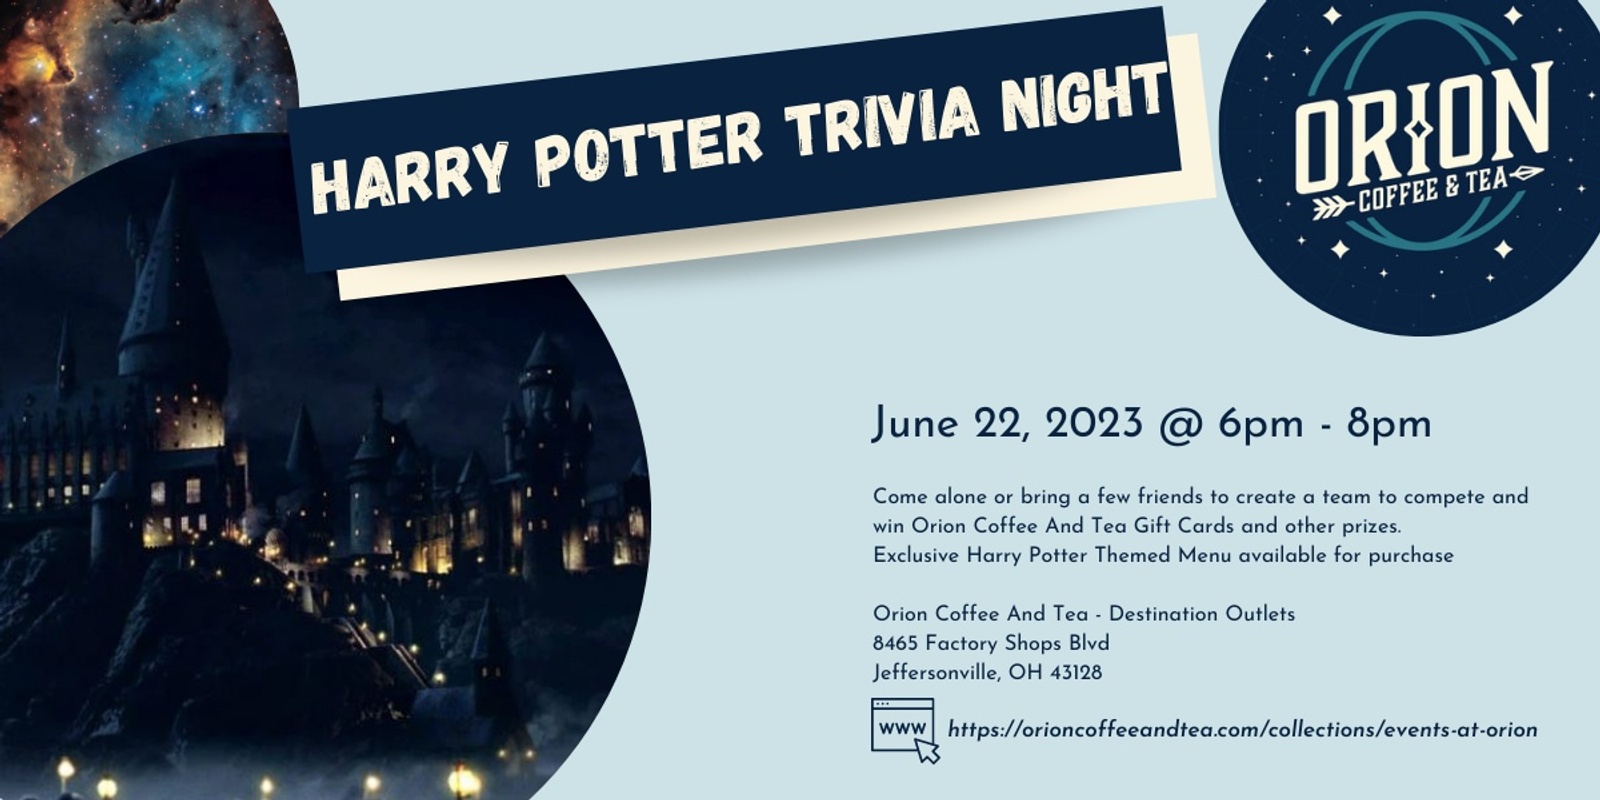 Banner image for Harry Potter Trivia at Orion Coffee And Tea - Destination Outlets